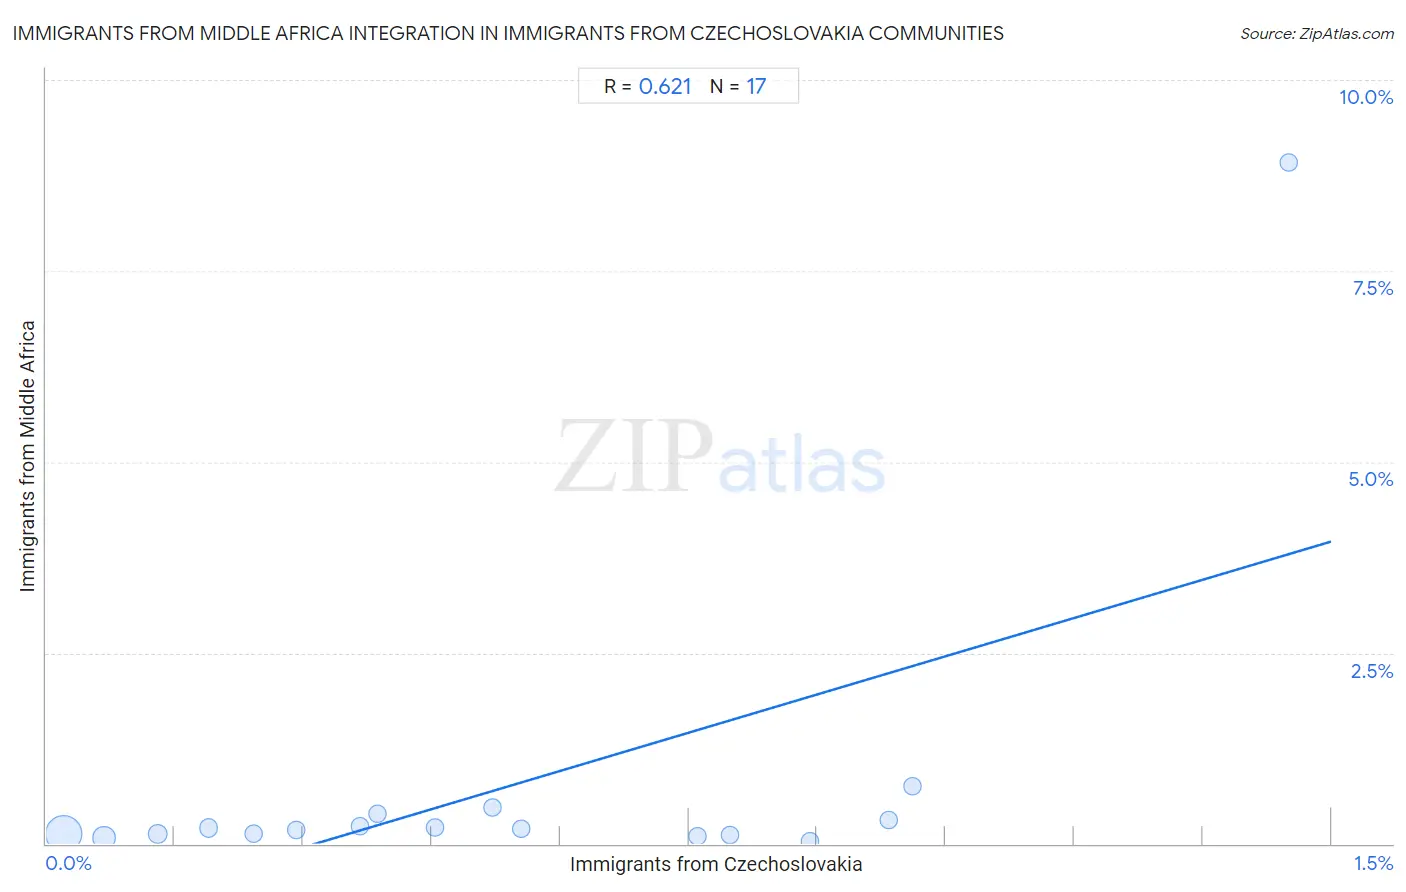 Immigrants from Czechoslovakia Integration in Immigrants from Middle Africa Communities